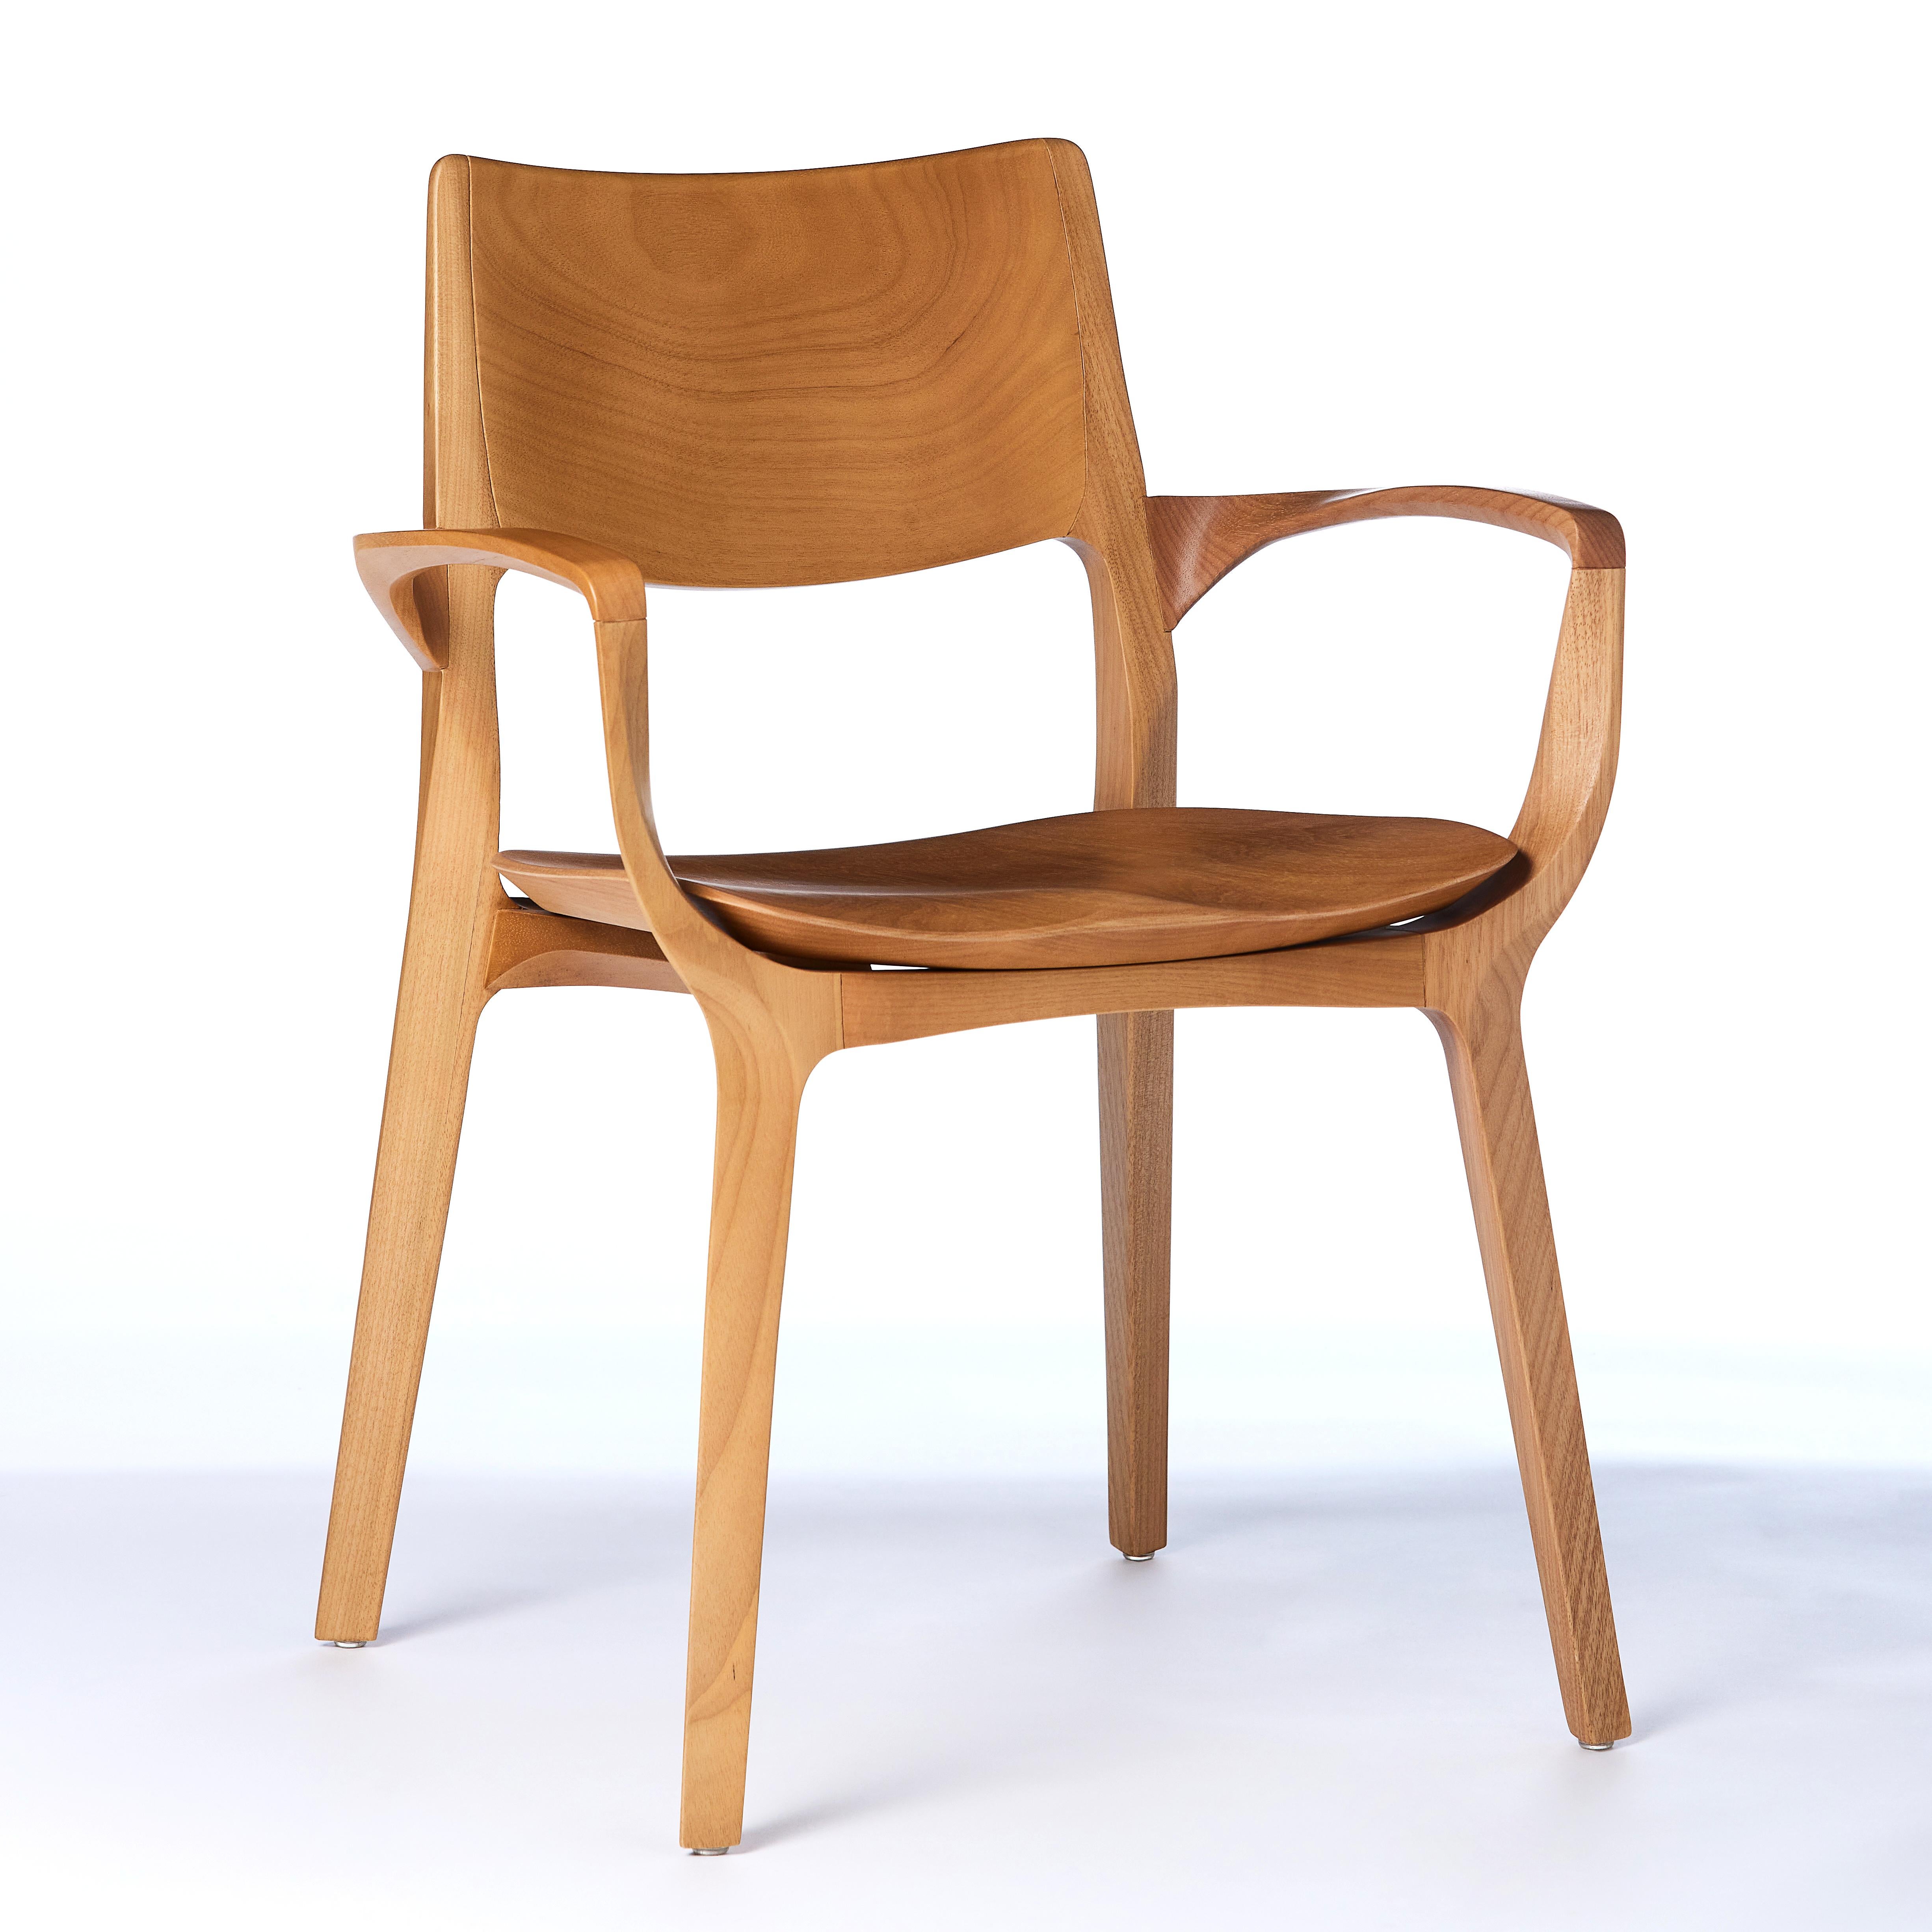 Post-Modern Style Aurora Chair in honey solid wood, vegan leather seating For Sale 7